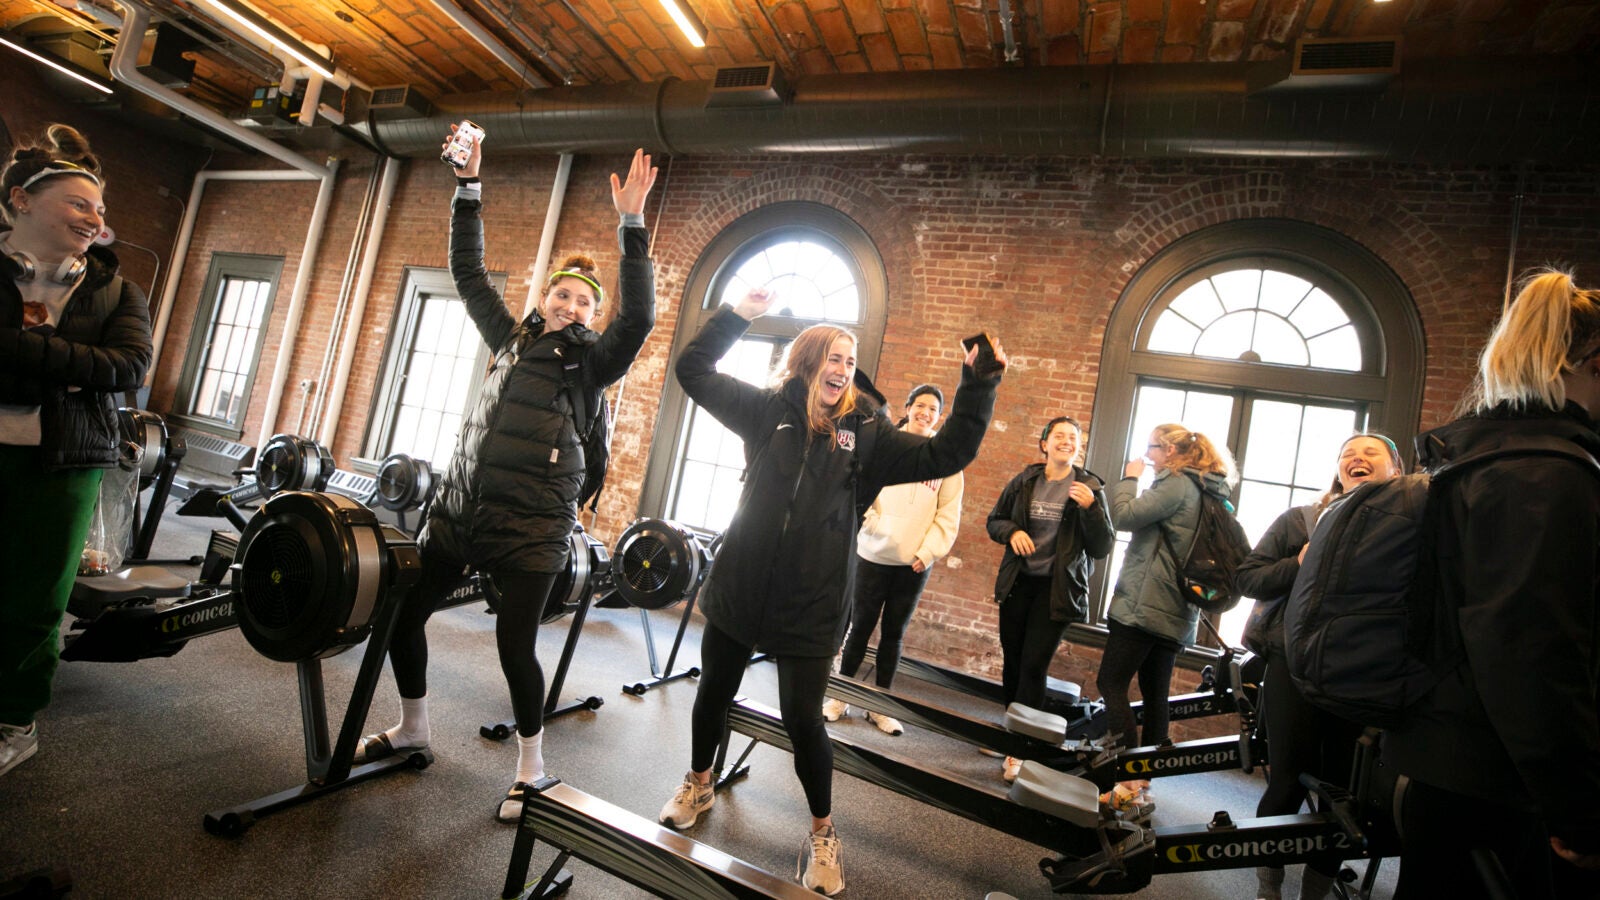 Members of rowing team dance in newly renovated Weld Boathouse.